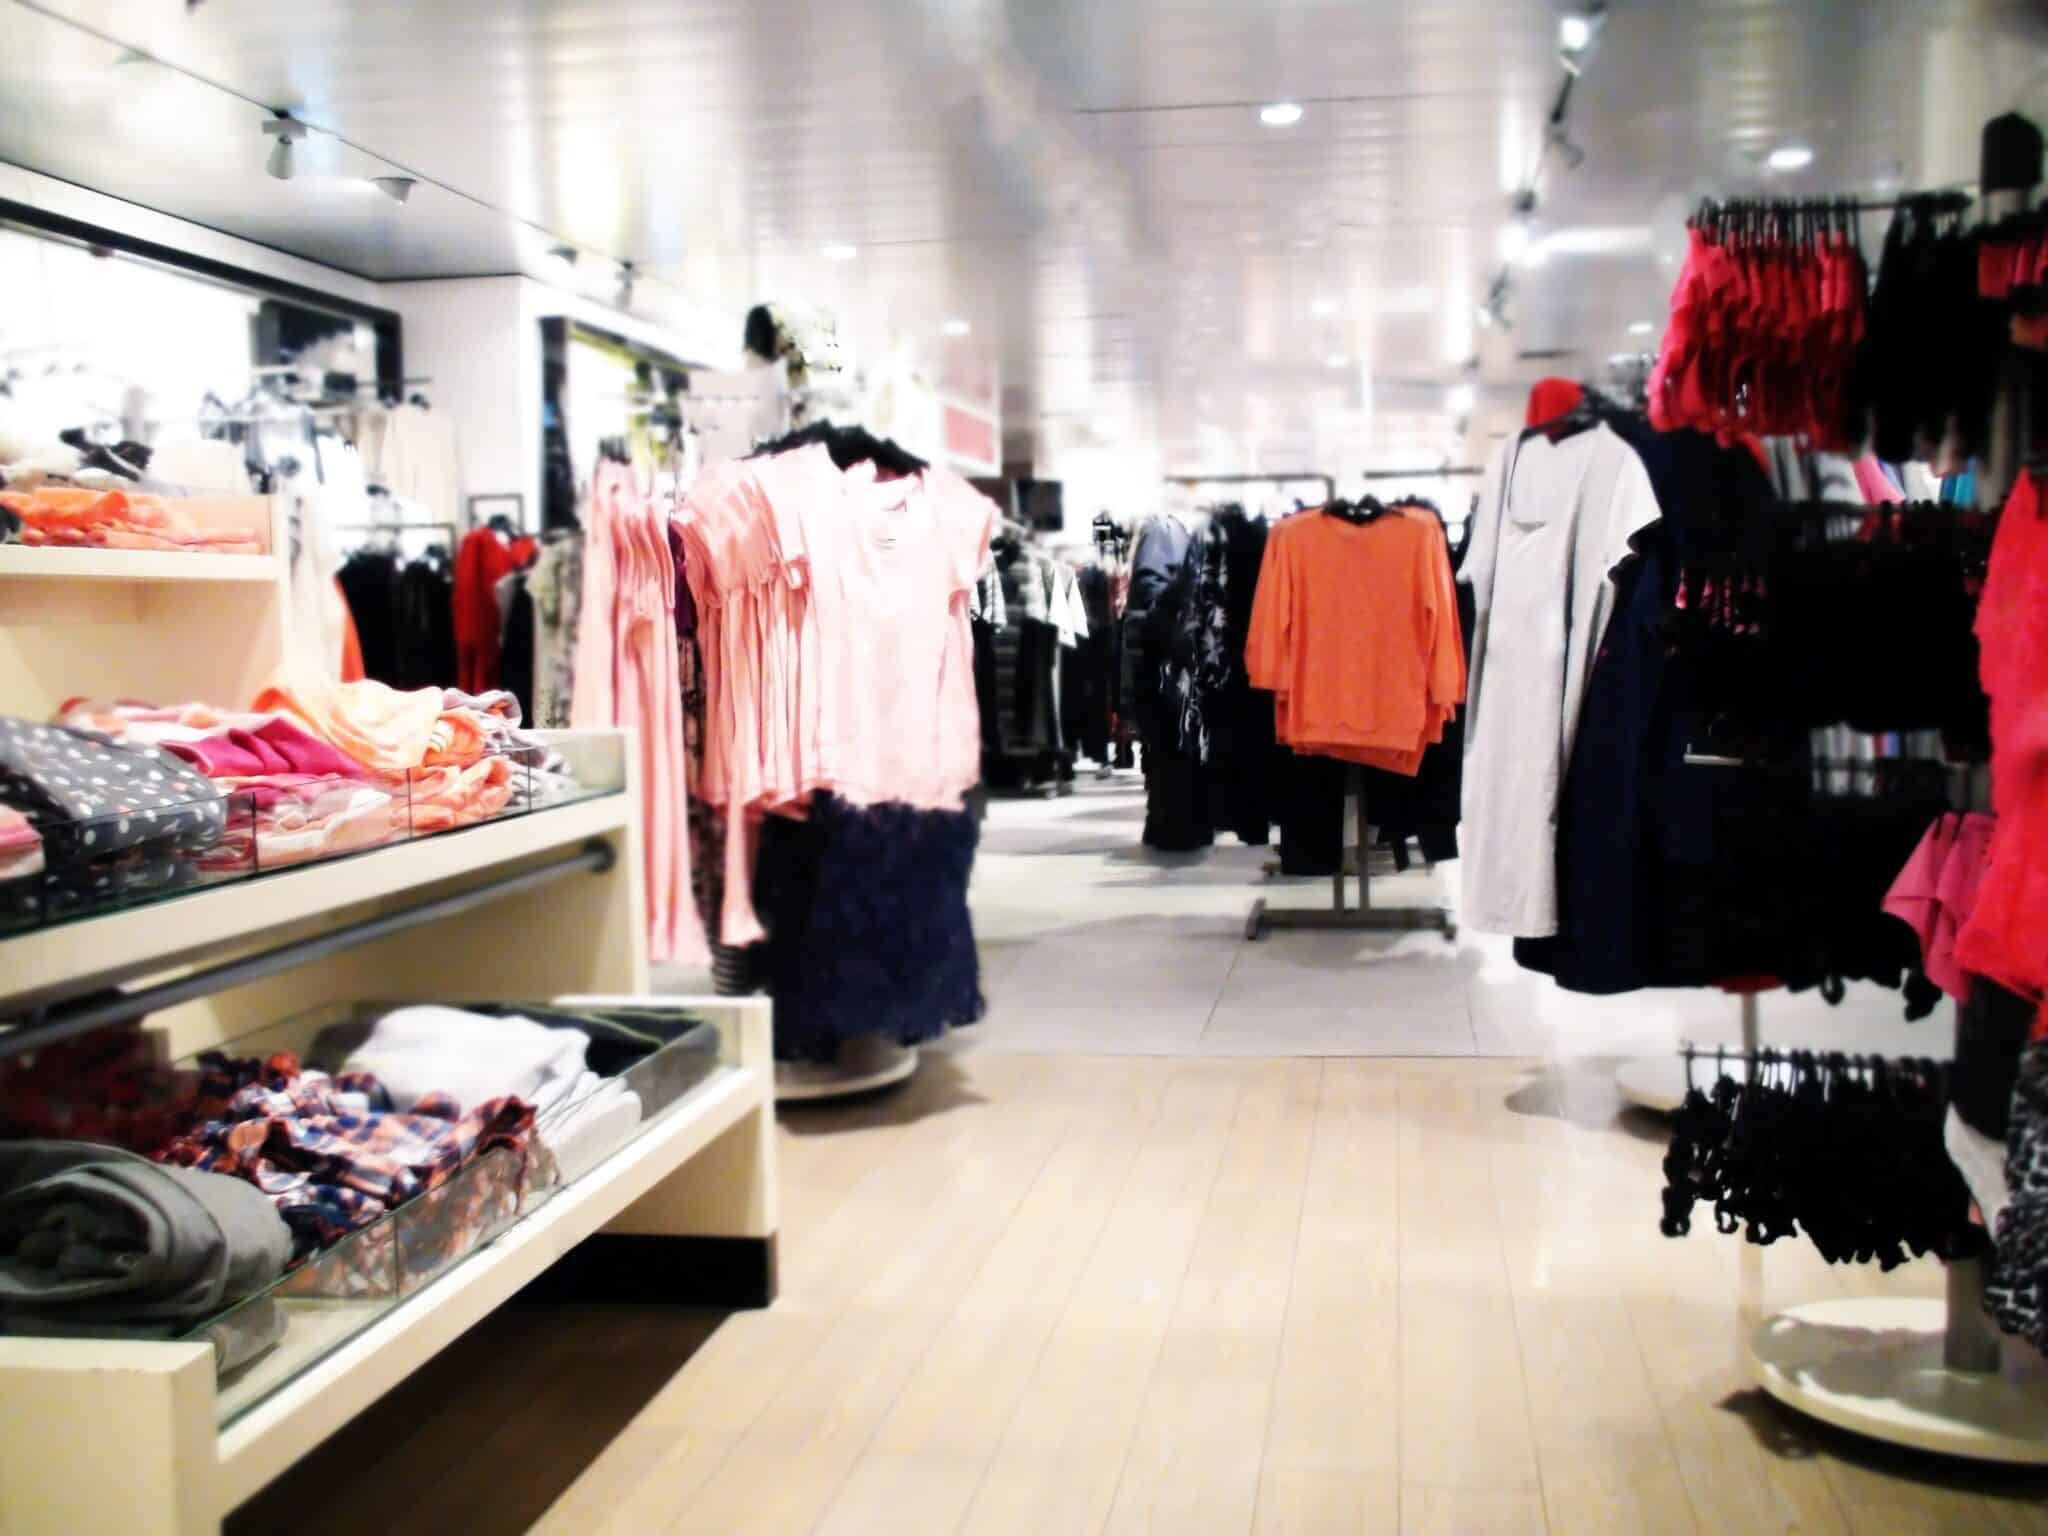 retail clothing store interior with clothes on shelves, tables and racks on display